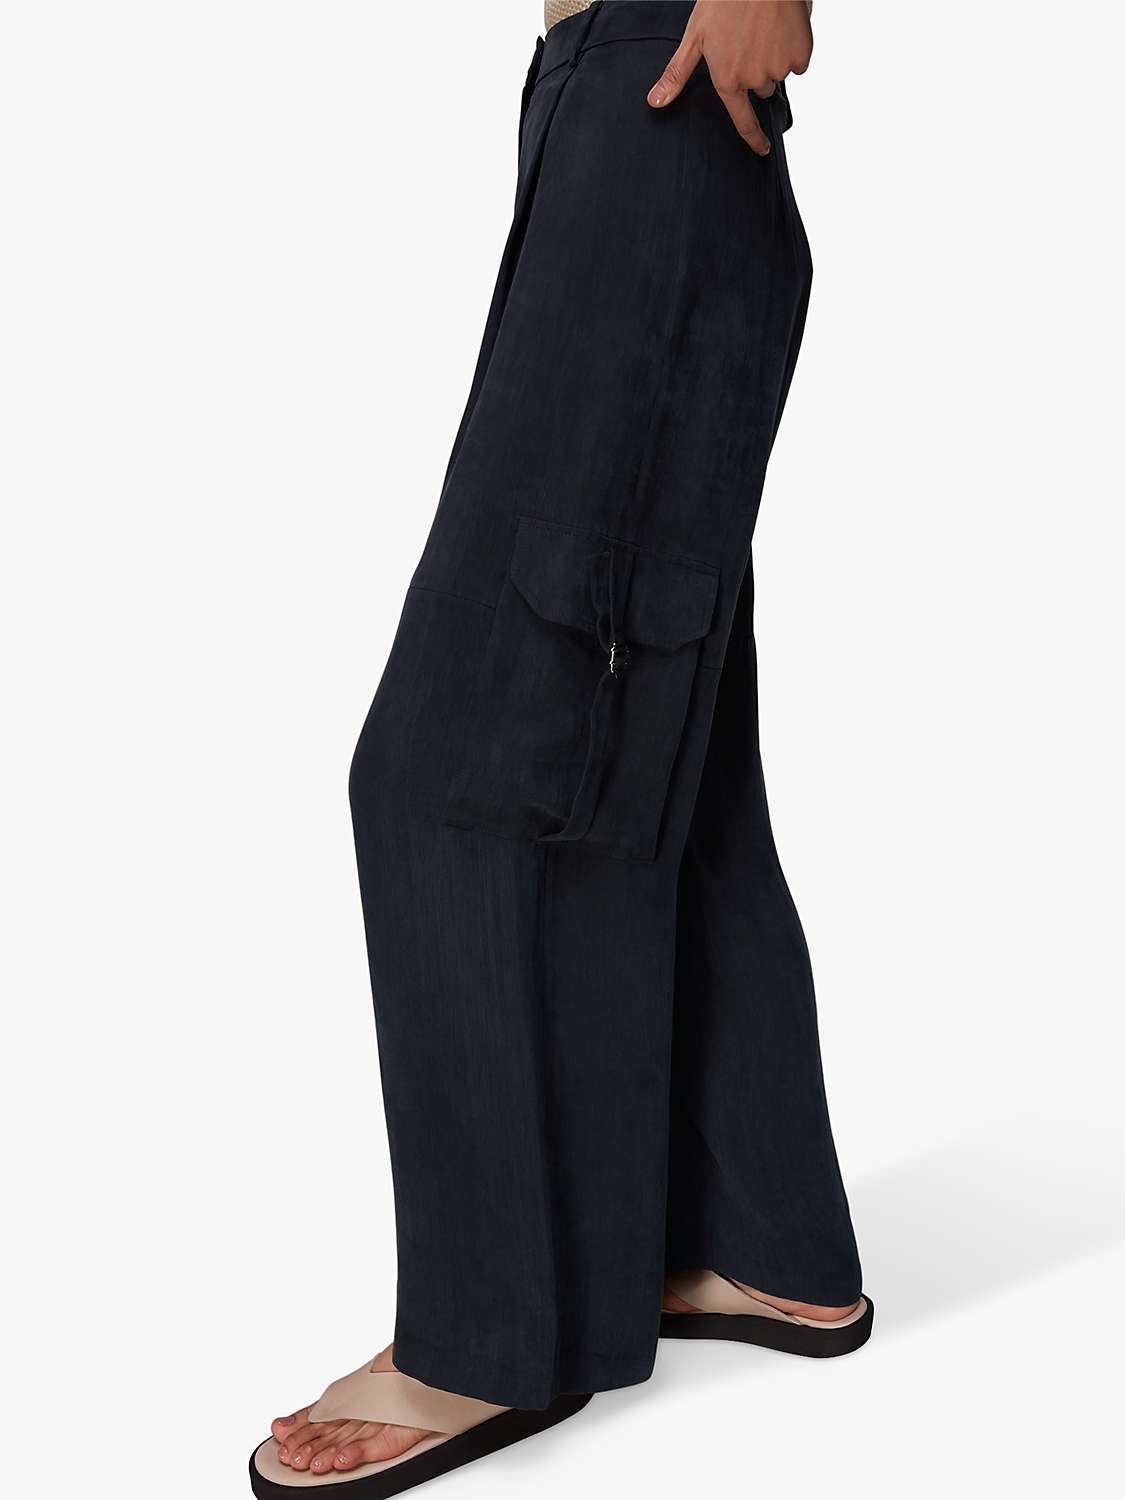 Whistles Evie Pull Wide Leg Trousers, Washed Black at John Lewis & Partners